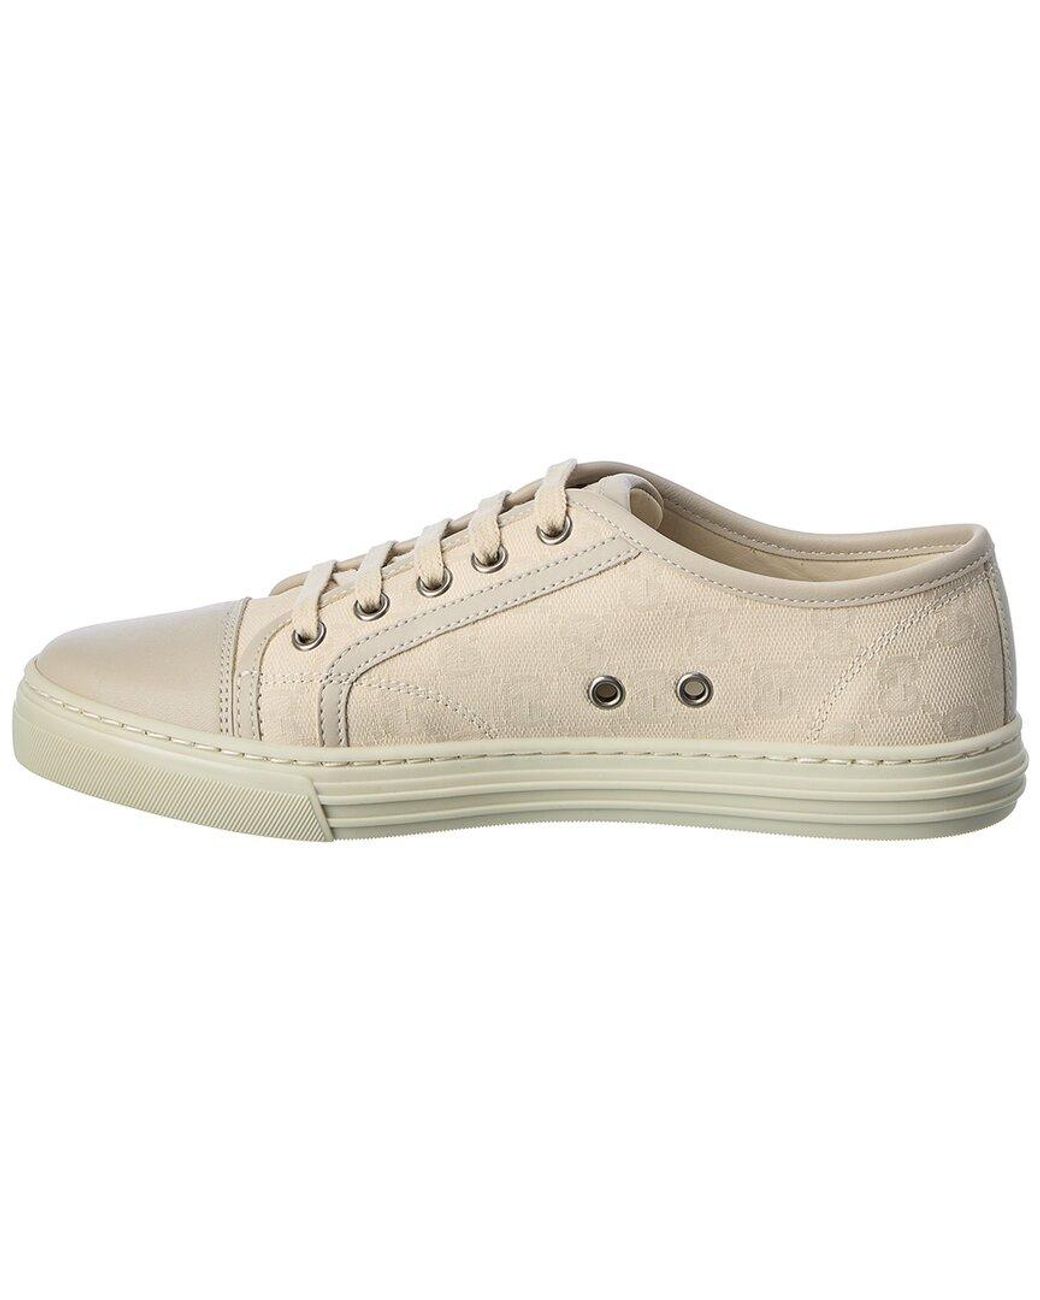 Gucci GG Canvas & Leather Sneaker in White | Lyst